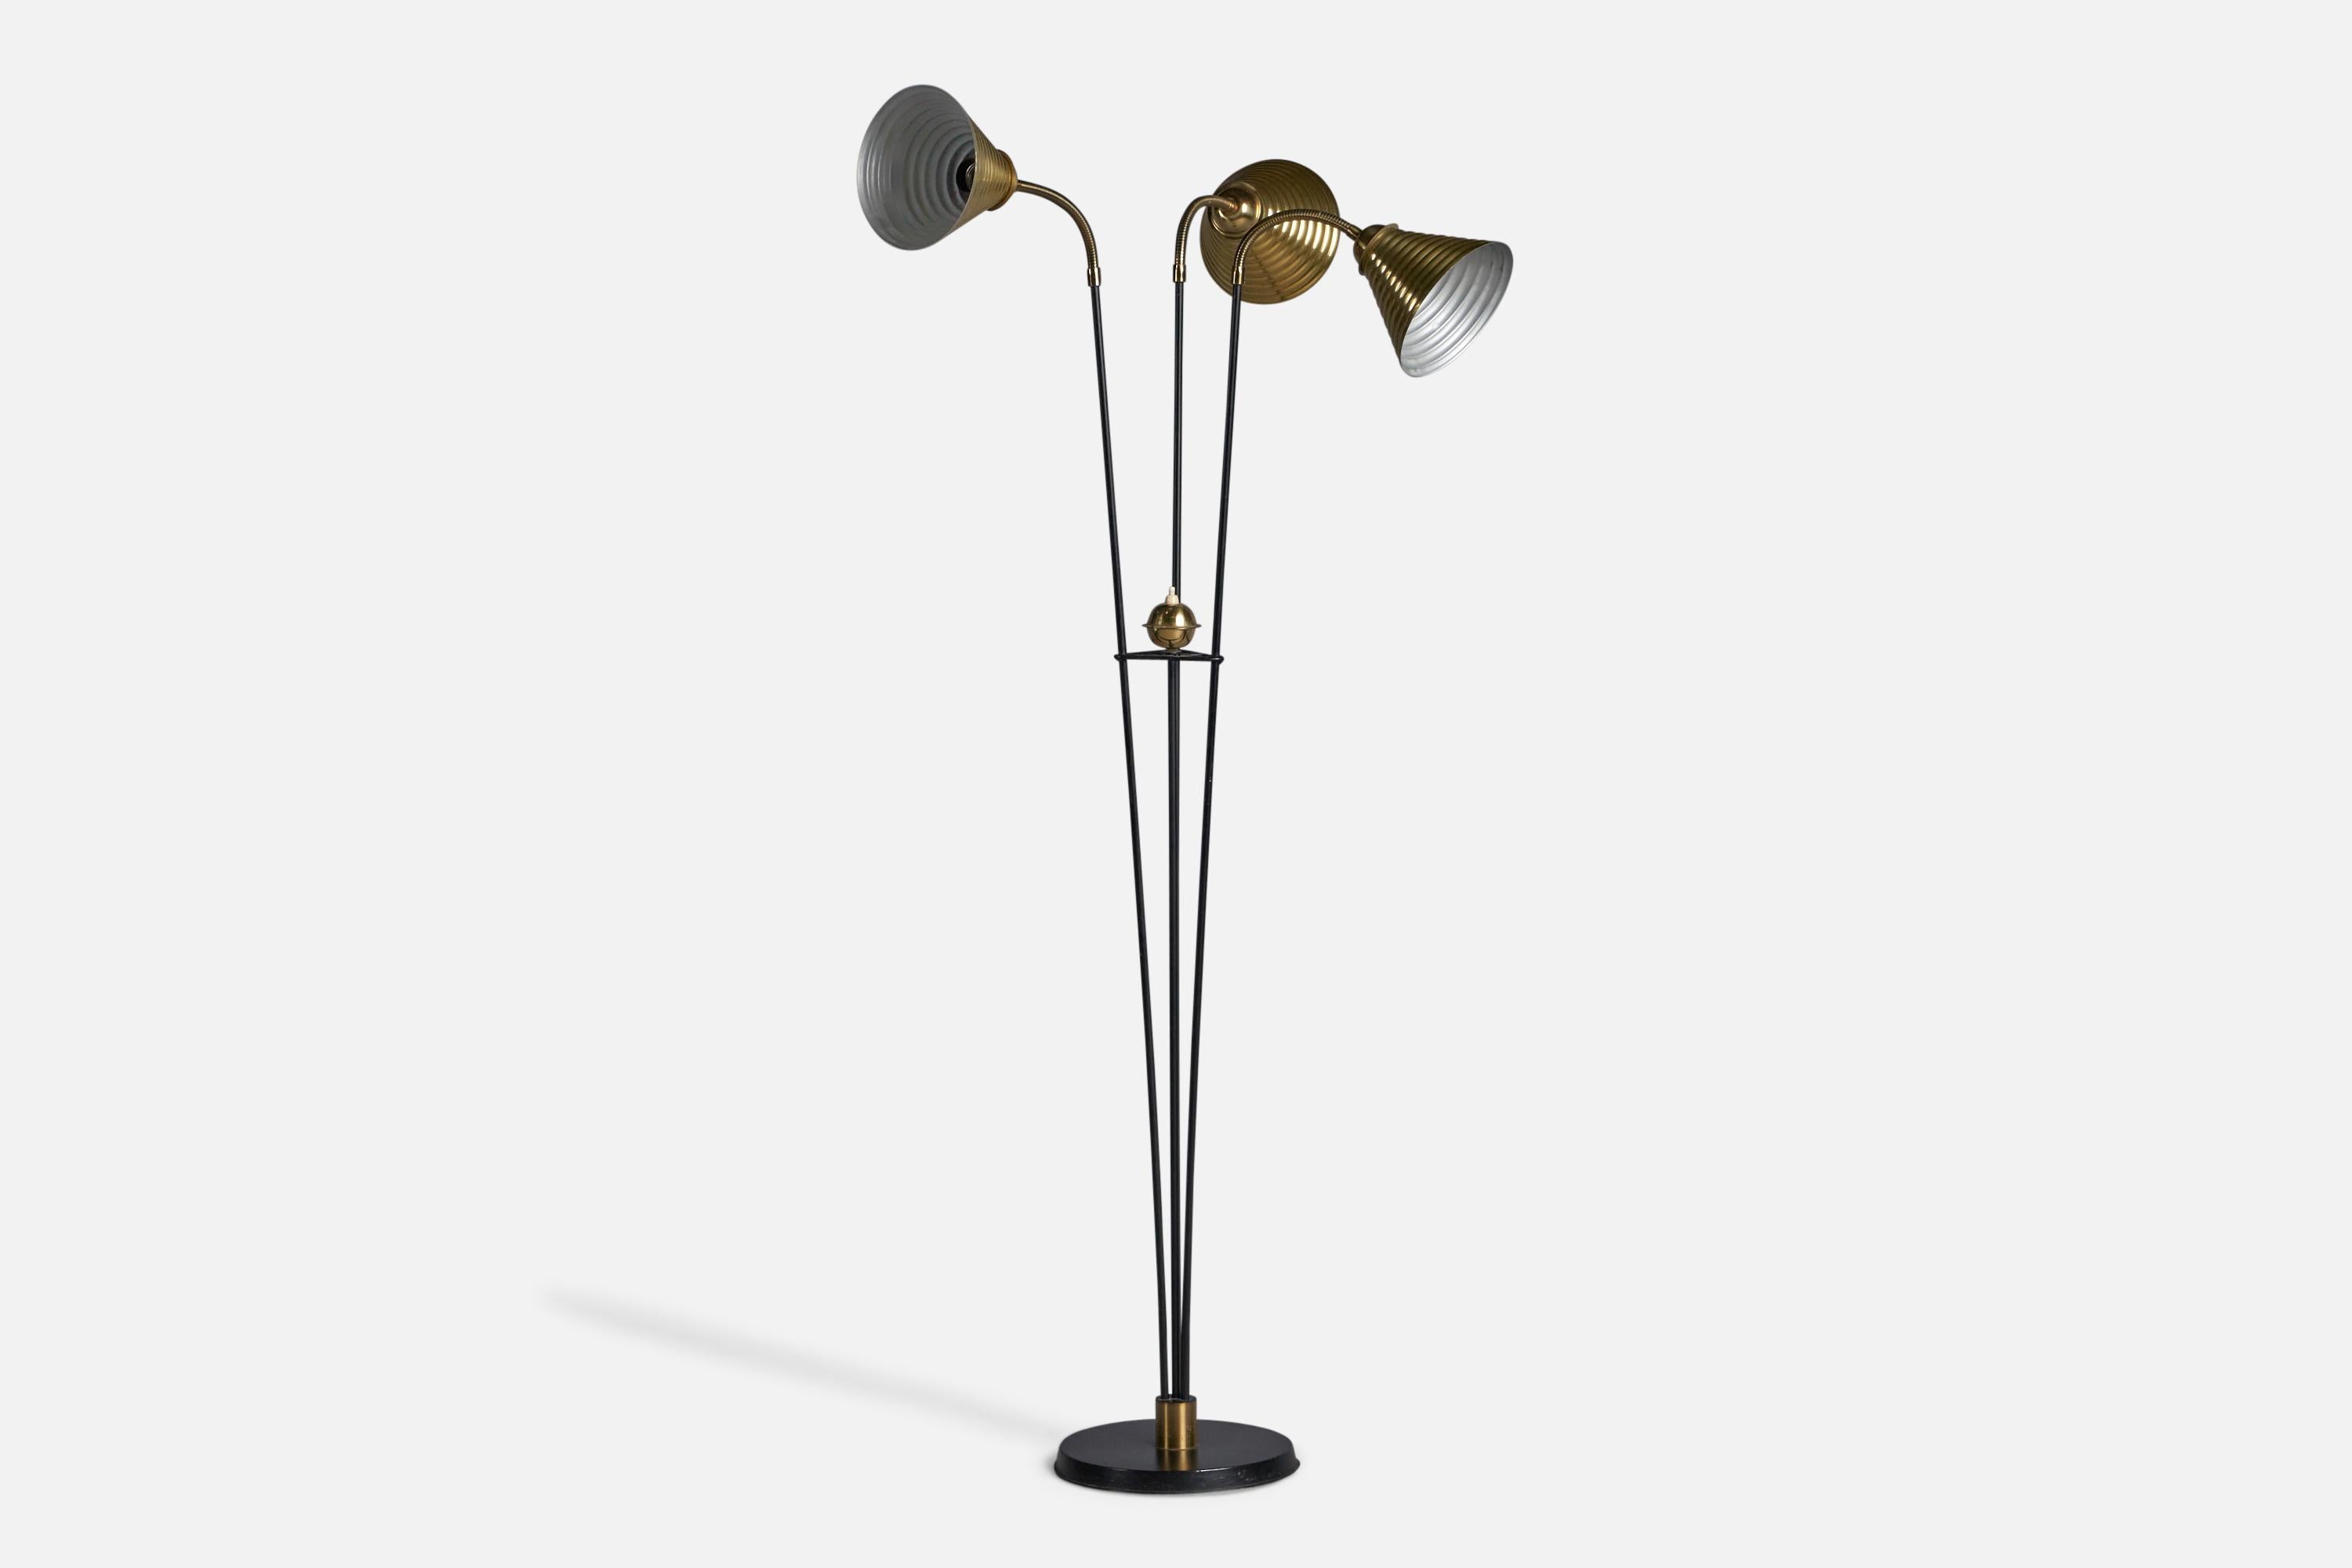 An adjustable three-armed brass and black-lacquered metal floor lamp, designed and produced in Sweden, c. 1950s.

Overall Dimensions (inches): 53.75